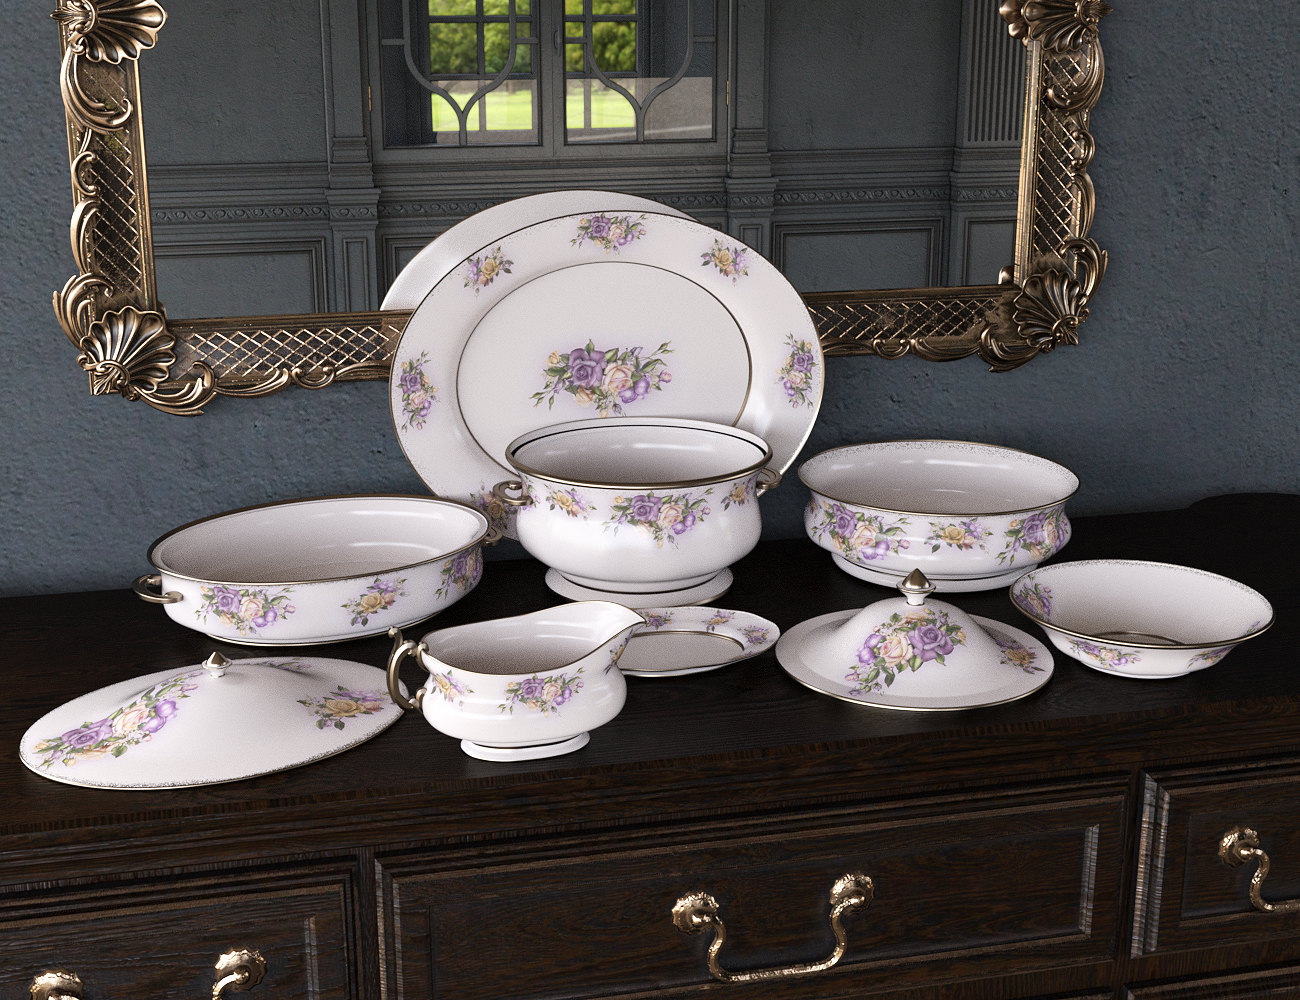 Patterns Vintage China 2 Iray by: LaurieS, 3D Models by Daz 3D